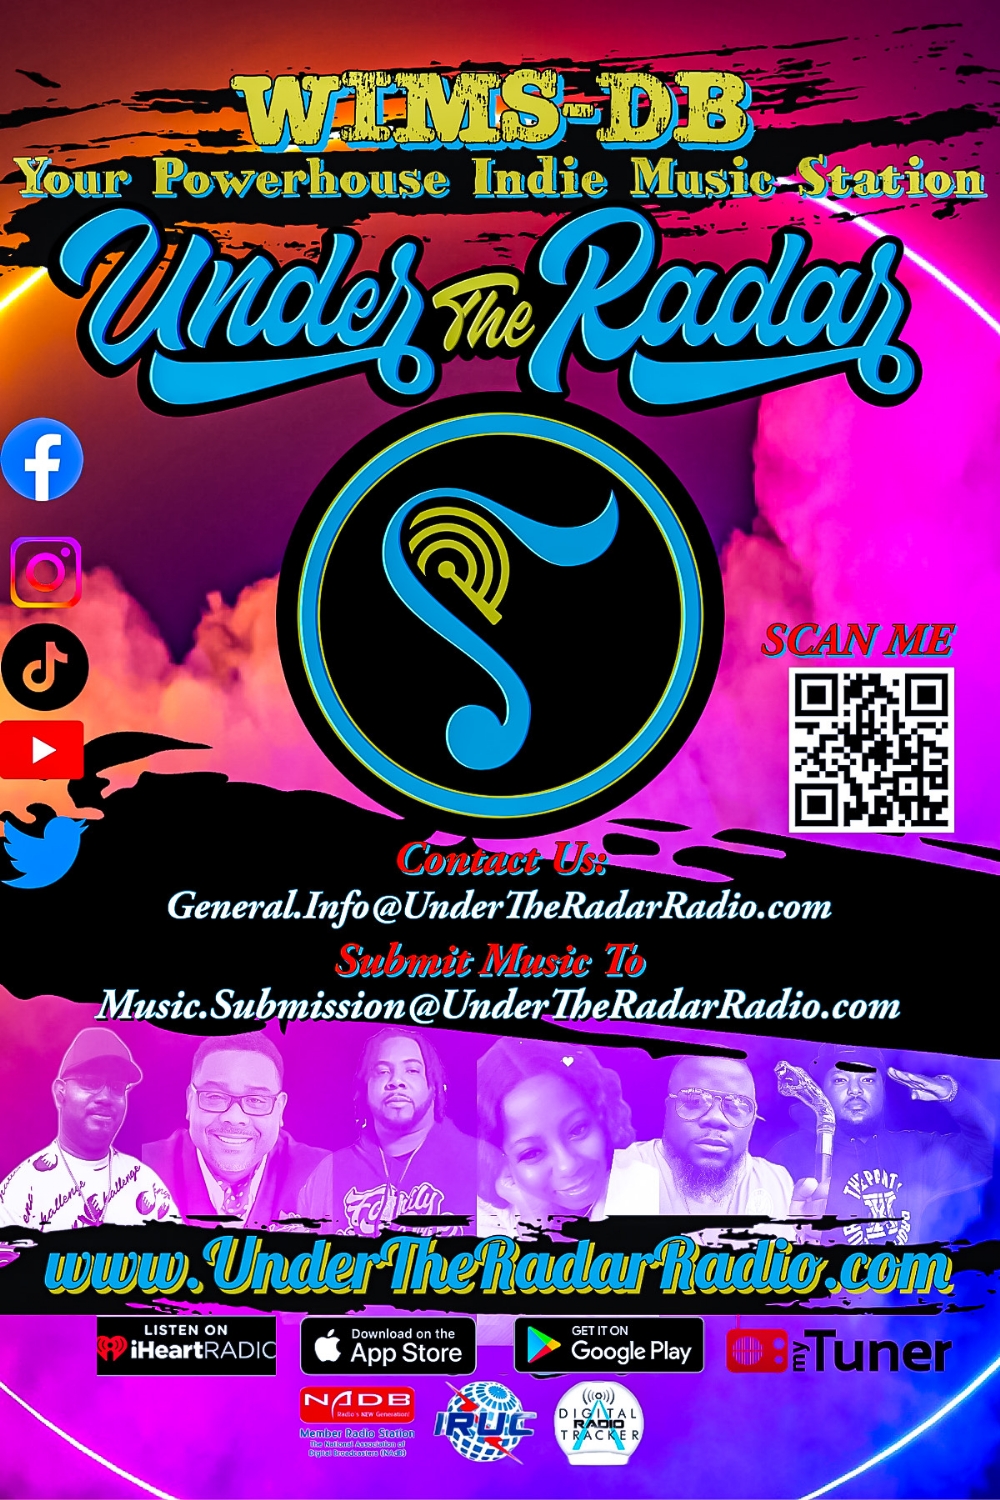 Under The Radar Radio WIMS-DB, Your Powerhouse Indie Music Station Is Now "Live" On iHeart Radio